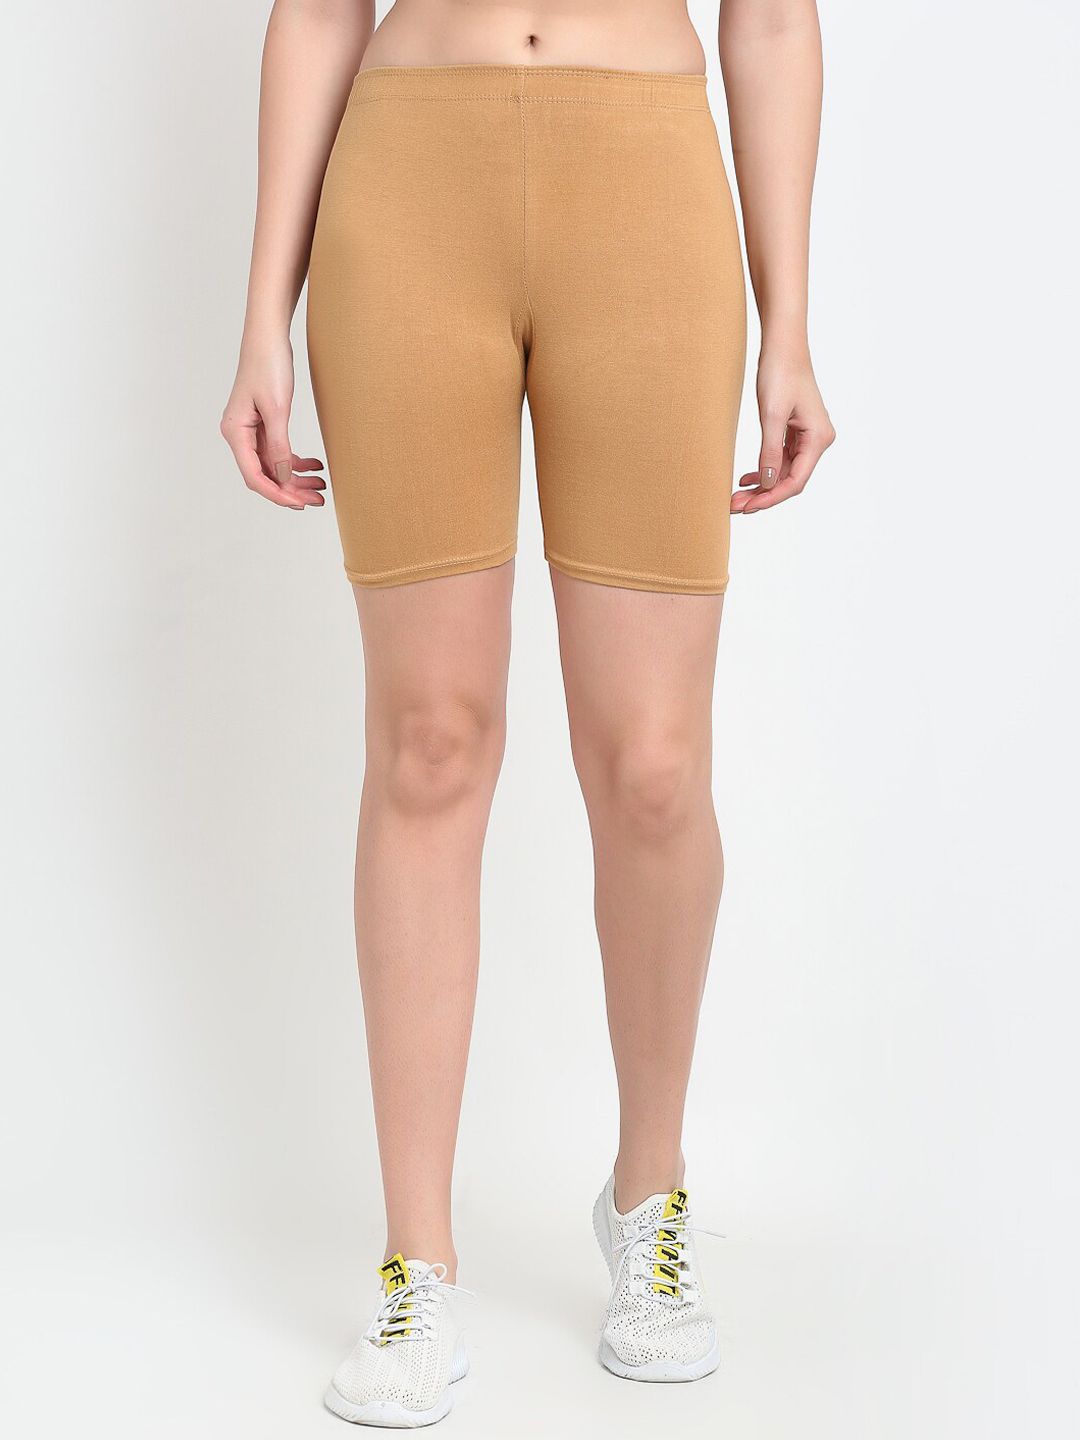 GRACIT Women Beige Cotton Cycling Sports Shorts Price in India